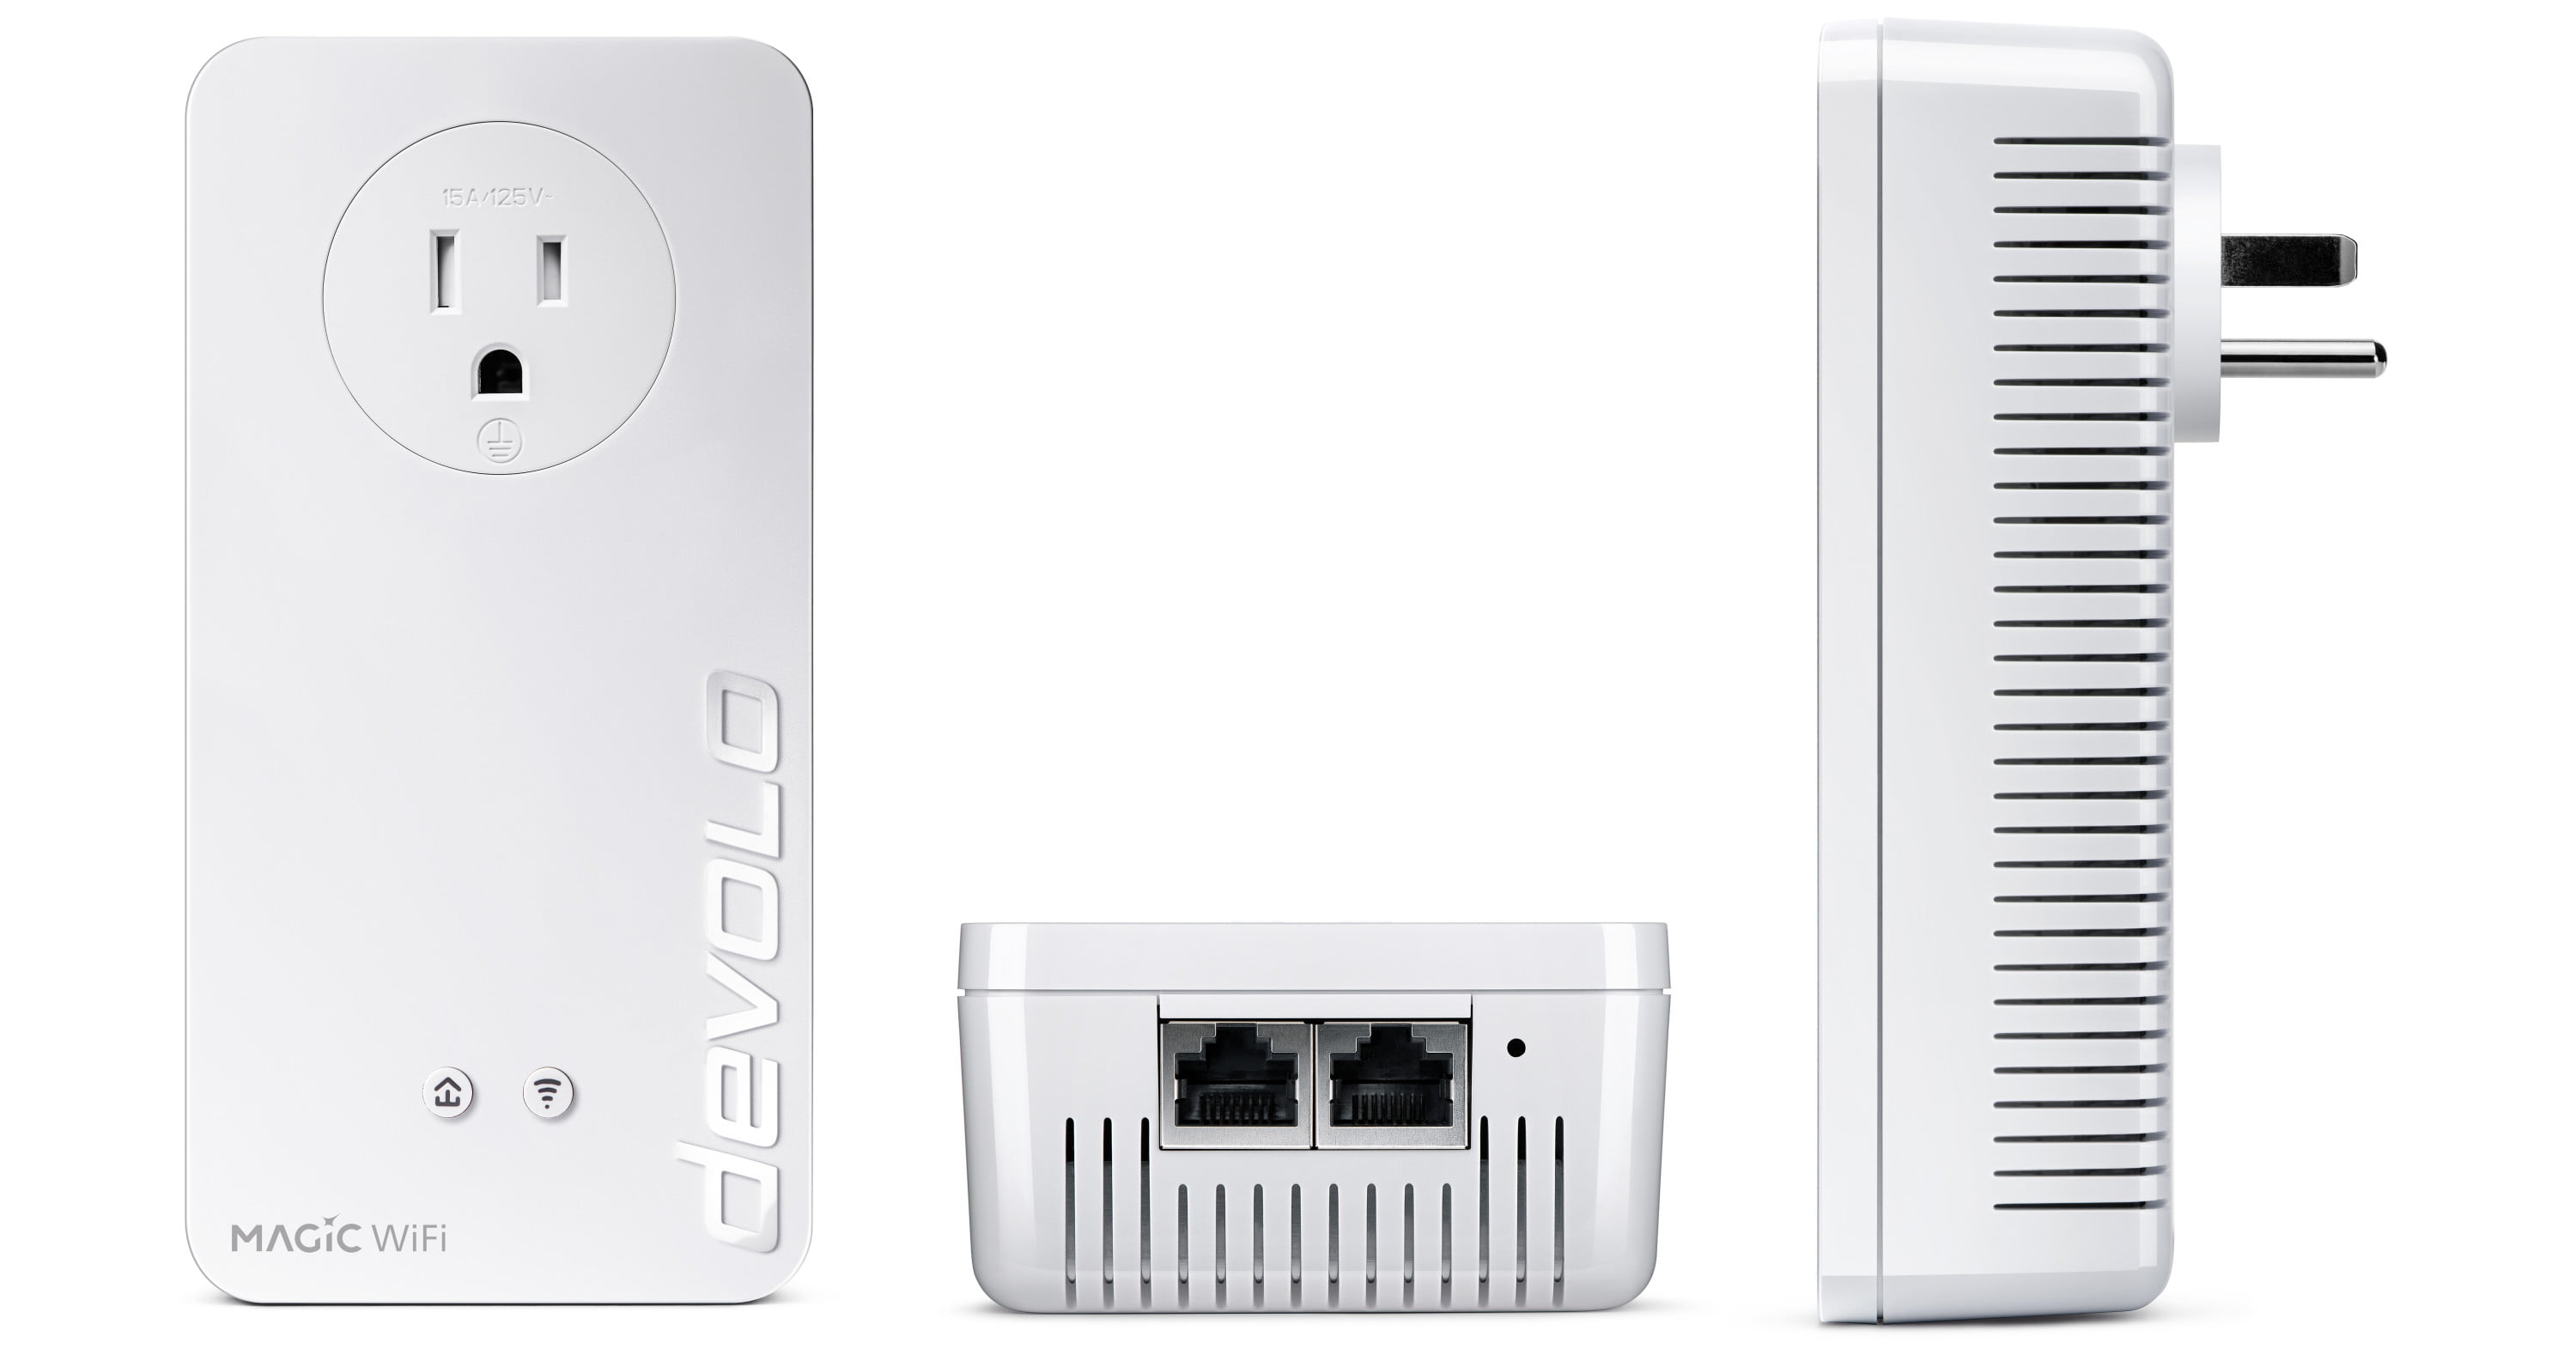  devolo: Wi-Fi anywhere at home